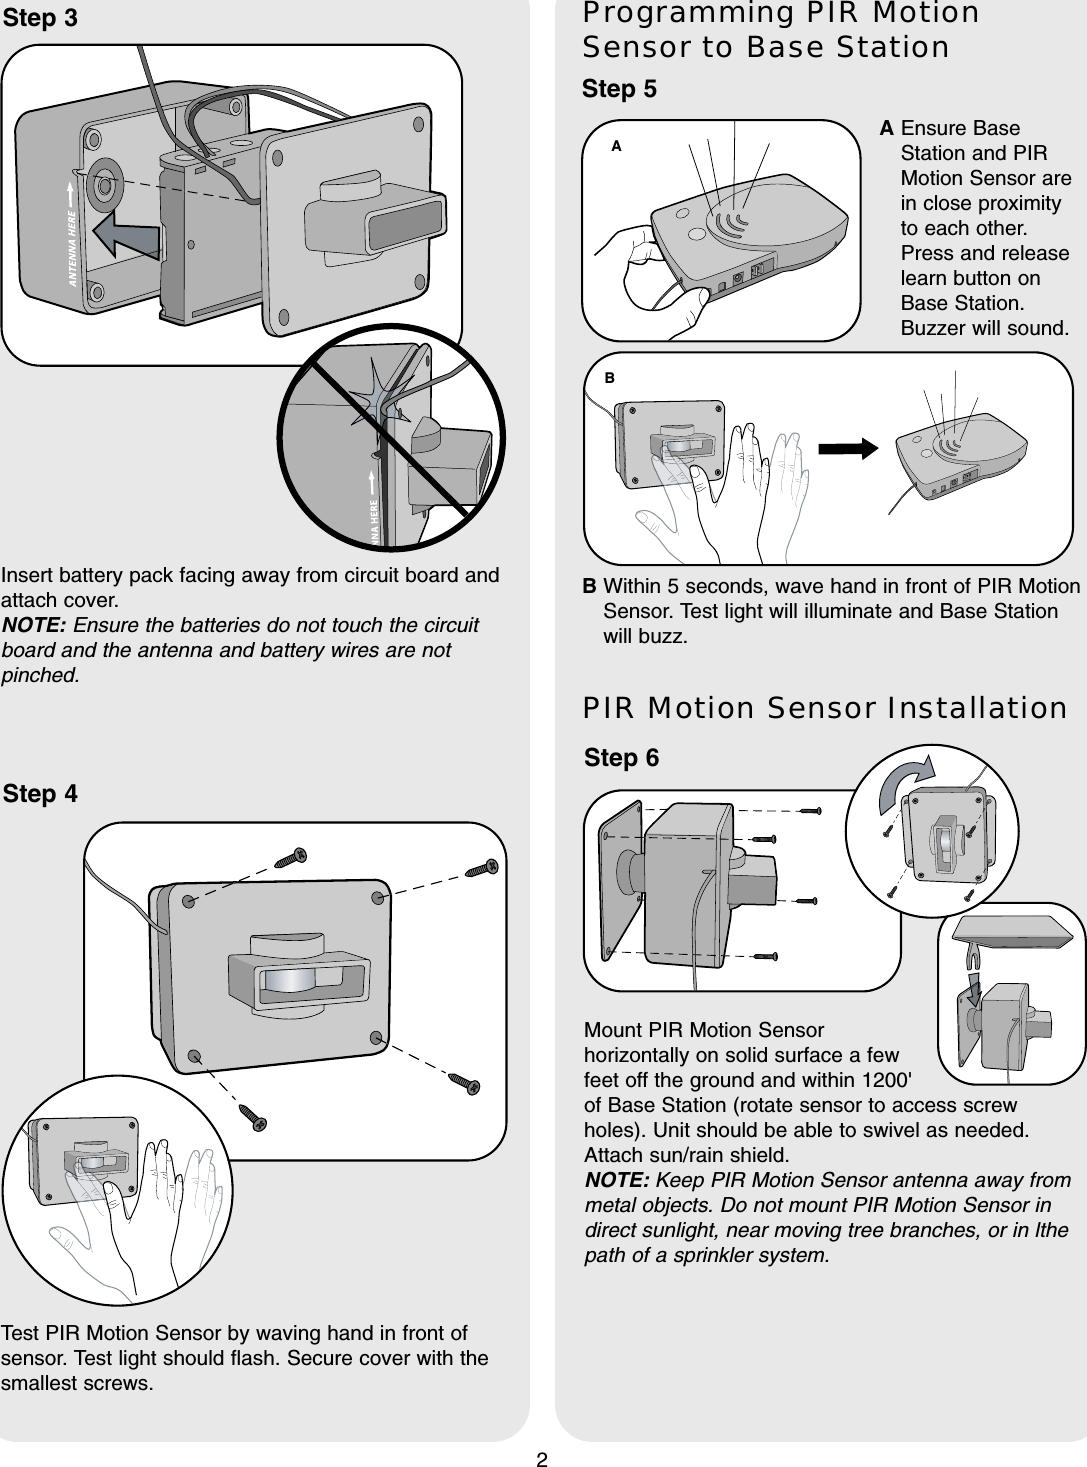 2Step 5Programming PIR MotionSensor to Base StationTest PIR Motion Sensor by waving hand in front ofsensor. Test light should flash. Secure cover with thesmallest screws.Step 3Insert battery pack facing away from circuit board andattach cover. NOTE: Ensure the batteries do not touch the circuitboard and the antenna and battery wires are notpinched.Step 4B Within 5 seconds, wave hand in front of PIR MotionSensor. Test light will illuminate and Base Stationwill buzz.--ABAEnsure BaseStation and PIRMotion Sensor arein close proximityto each other.Press and releaselearn button onBase Station.Buzzer will sound.Step 6PIR Motion Sensor InstallationMount PIR Motion Sensorhorizontally on solid surface a fewfeet off the ground and within 1200&apos; of Base Station (rotate sensor to access screwholes). Unit should be able to swivel as needed.Attach sun/rain shield.NOTE: Keep PIR Motion Sensor antenna away frommetal objects. Do not mount PIR Motion Sensor indirect sunlight, near moving tree branches, or in lthepath of a sprinkler system.